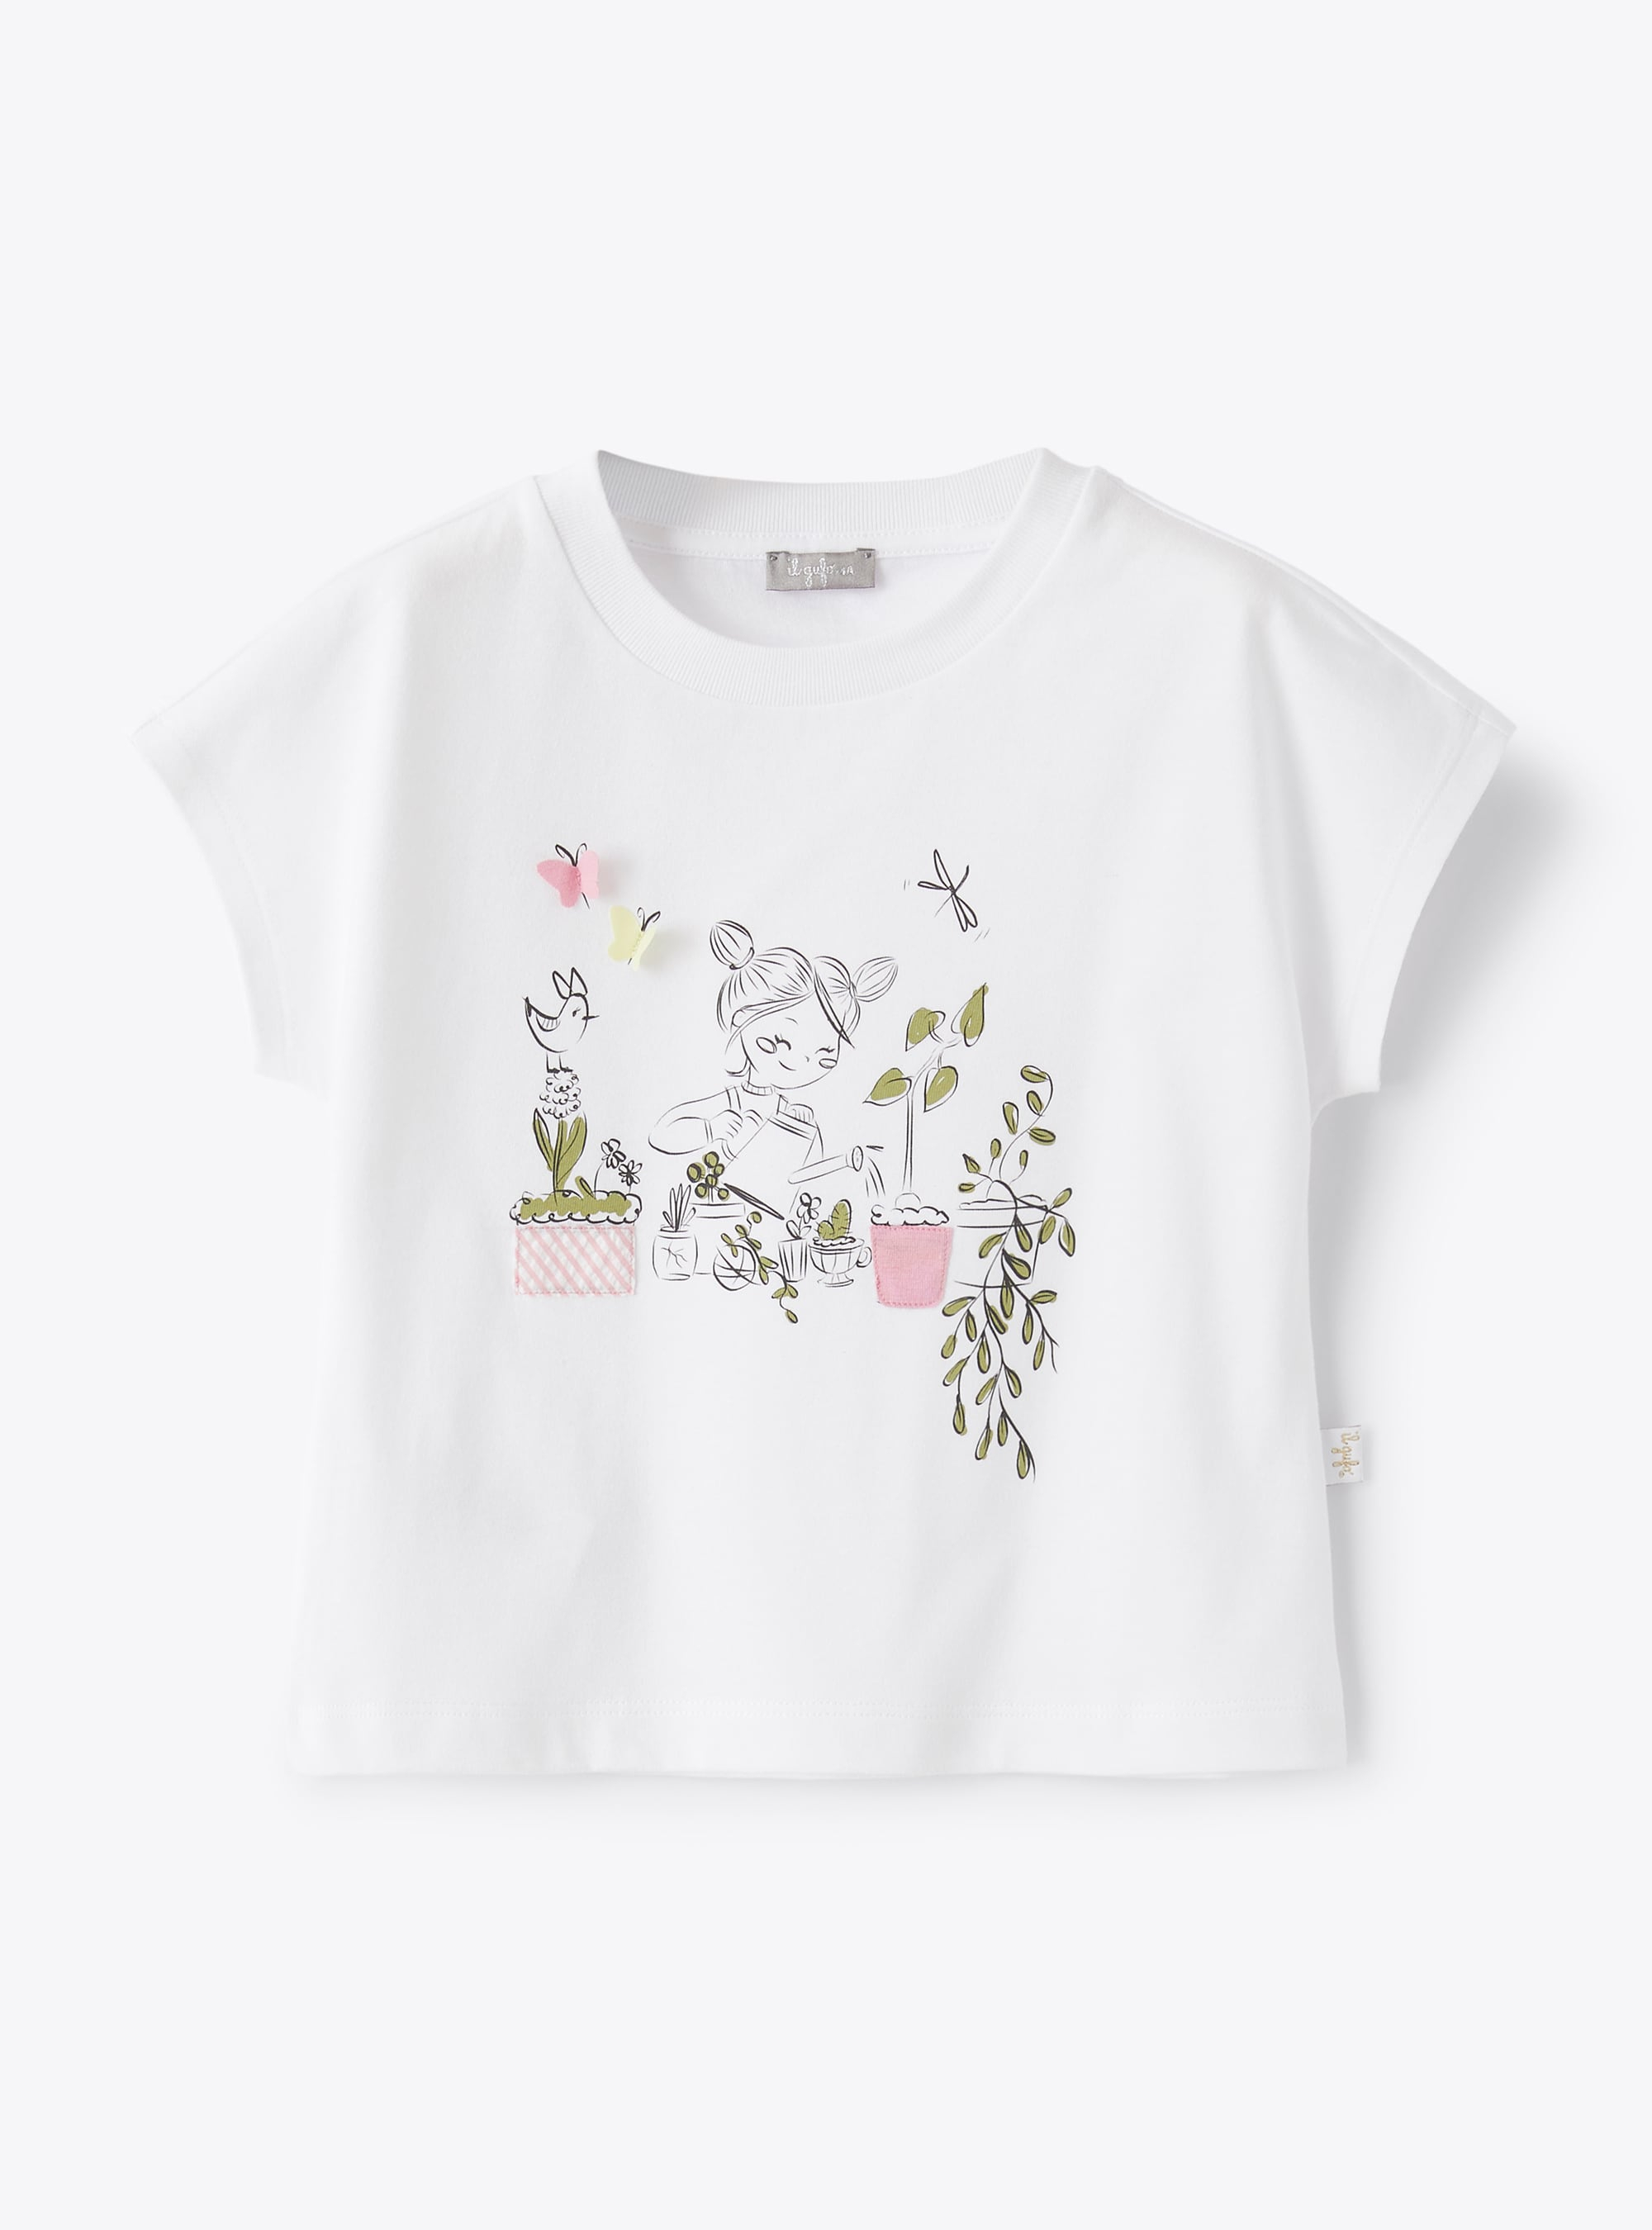 White t-shirt with print of little girl - White | Il Gufo